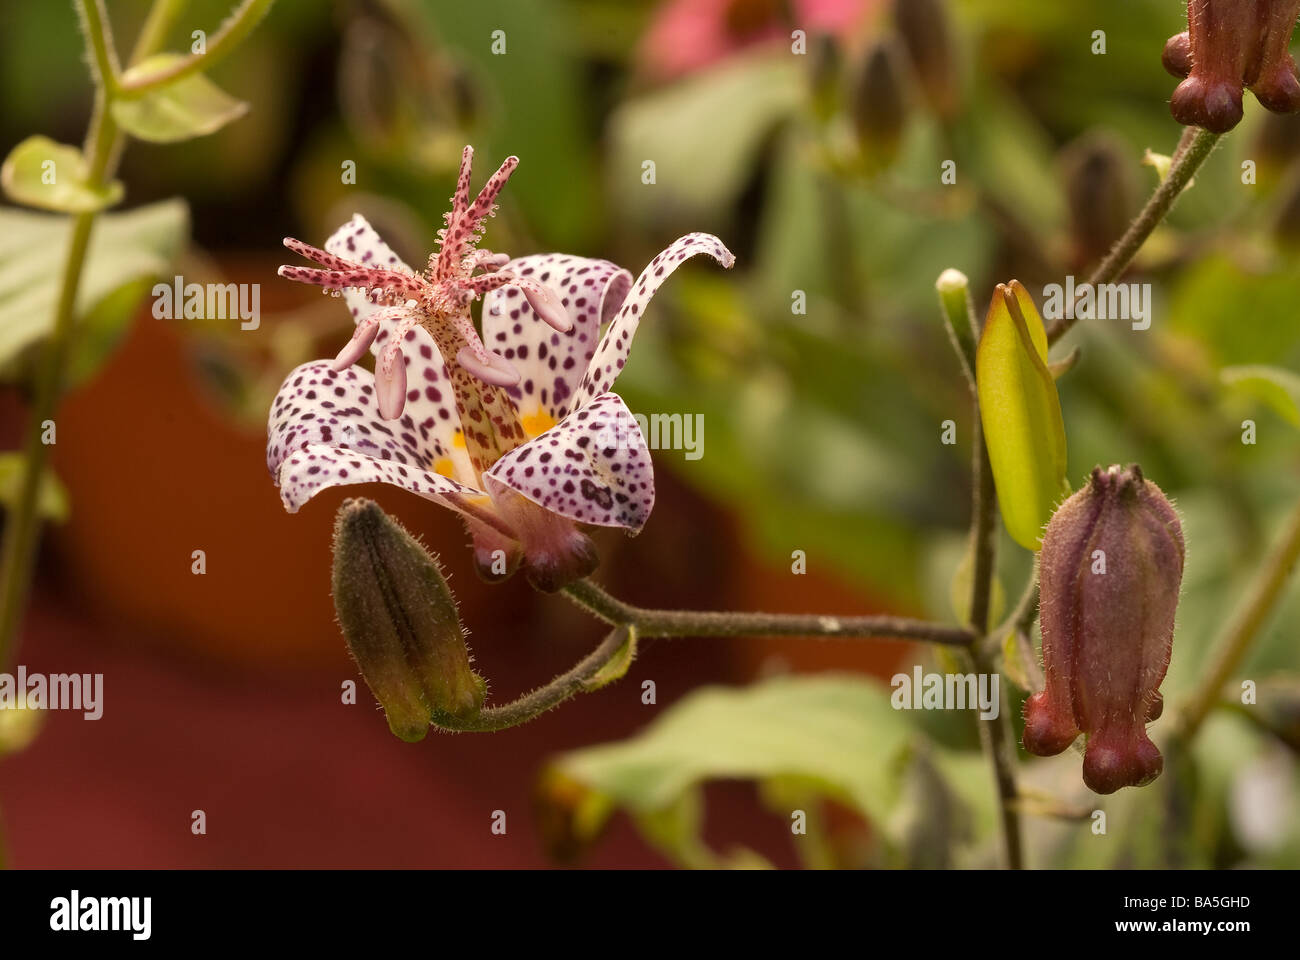 Toad Lily Tricyrtis hirta, Liliaceae Stock Photo